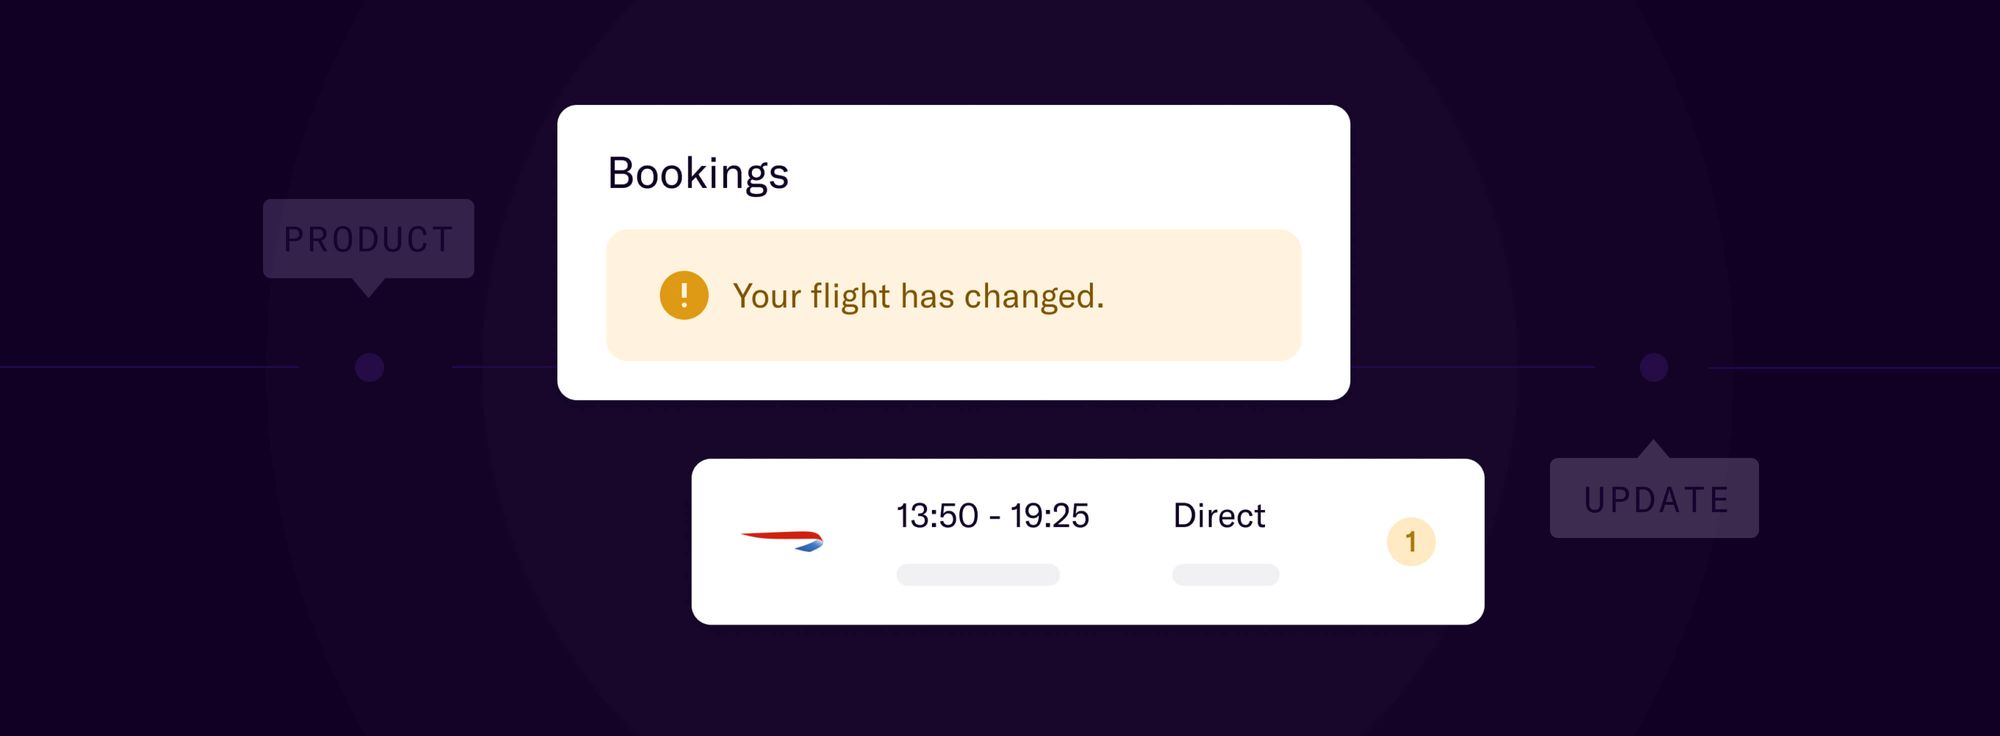 Manage flight changes in minutes with new Order Management features